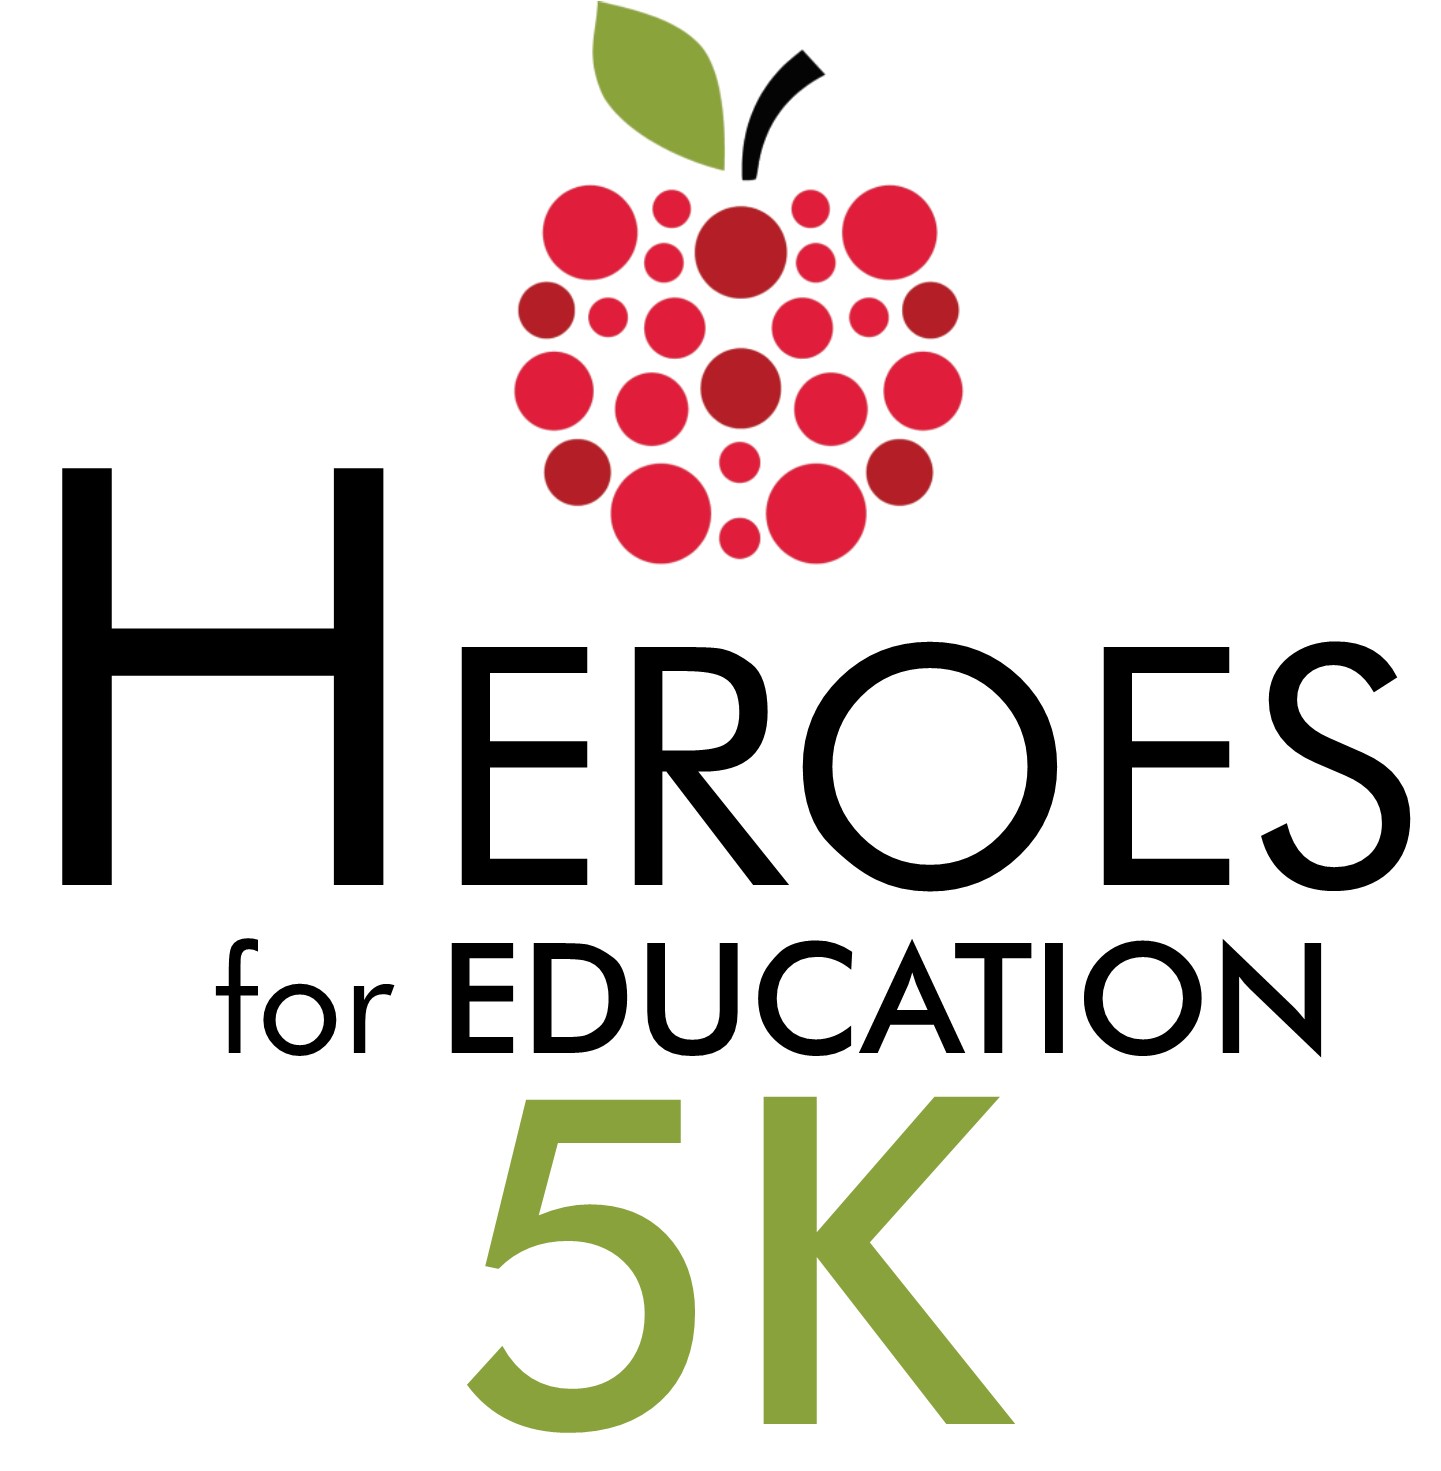 Heroes for Education 2016 Logo